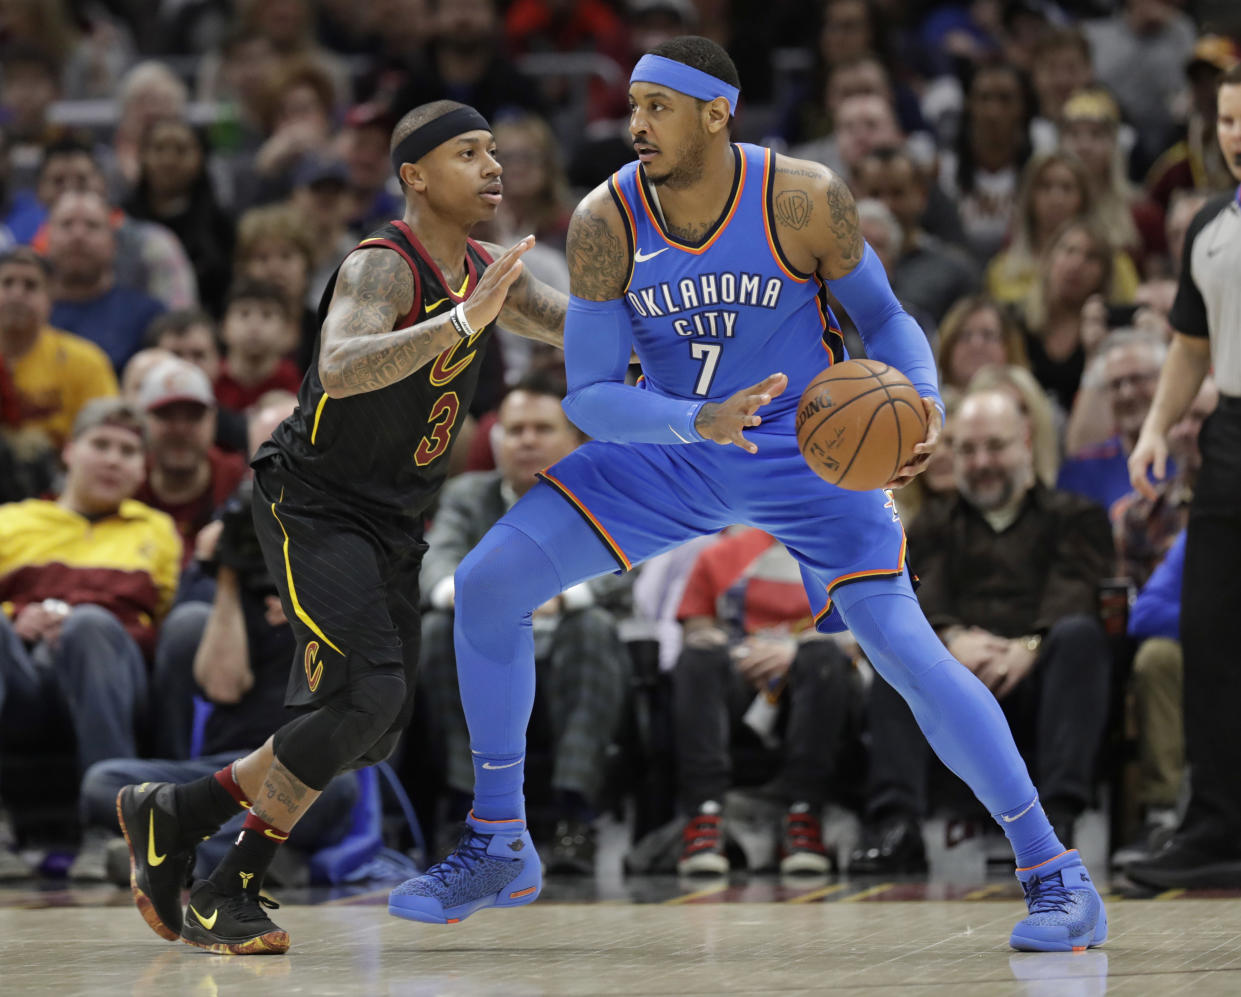 Oklahoma City Thunder’s Carmelo Anthony (7) drives against Cleveland Cavaliers’ Isaiah Thomas (3) in the first half of an NBA basketball game, Saturday, Jan. 20, 2018, in Cleveland. (AP Photo/Tony Dejak)